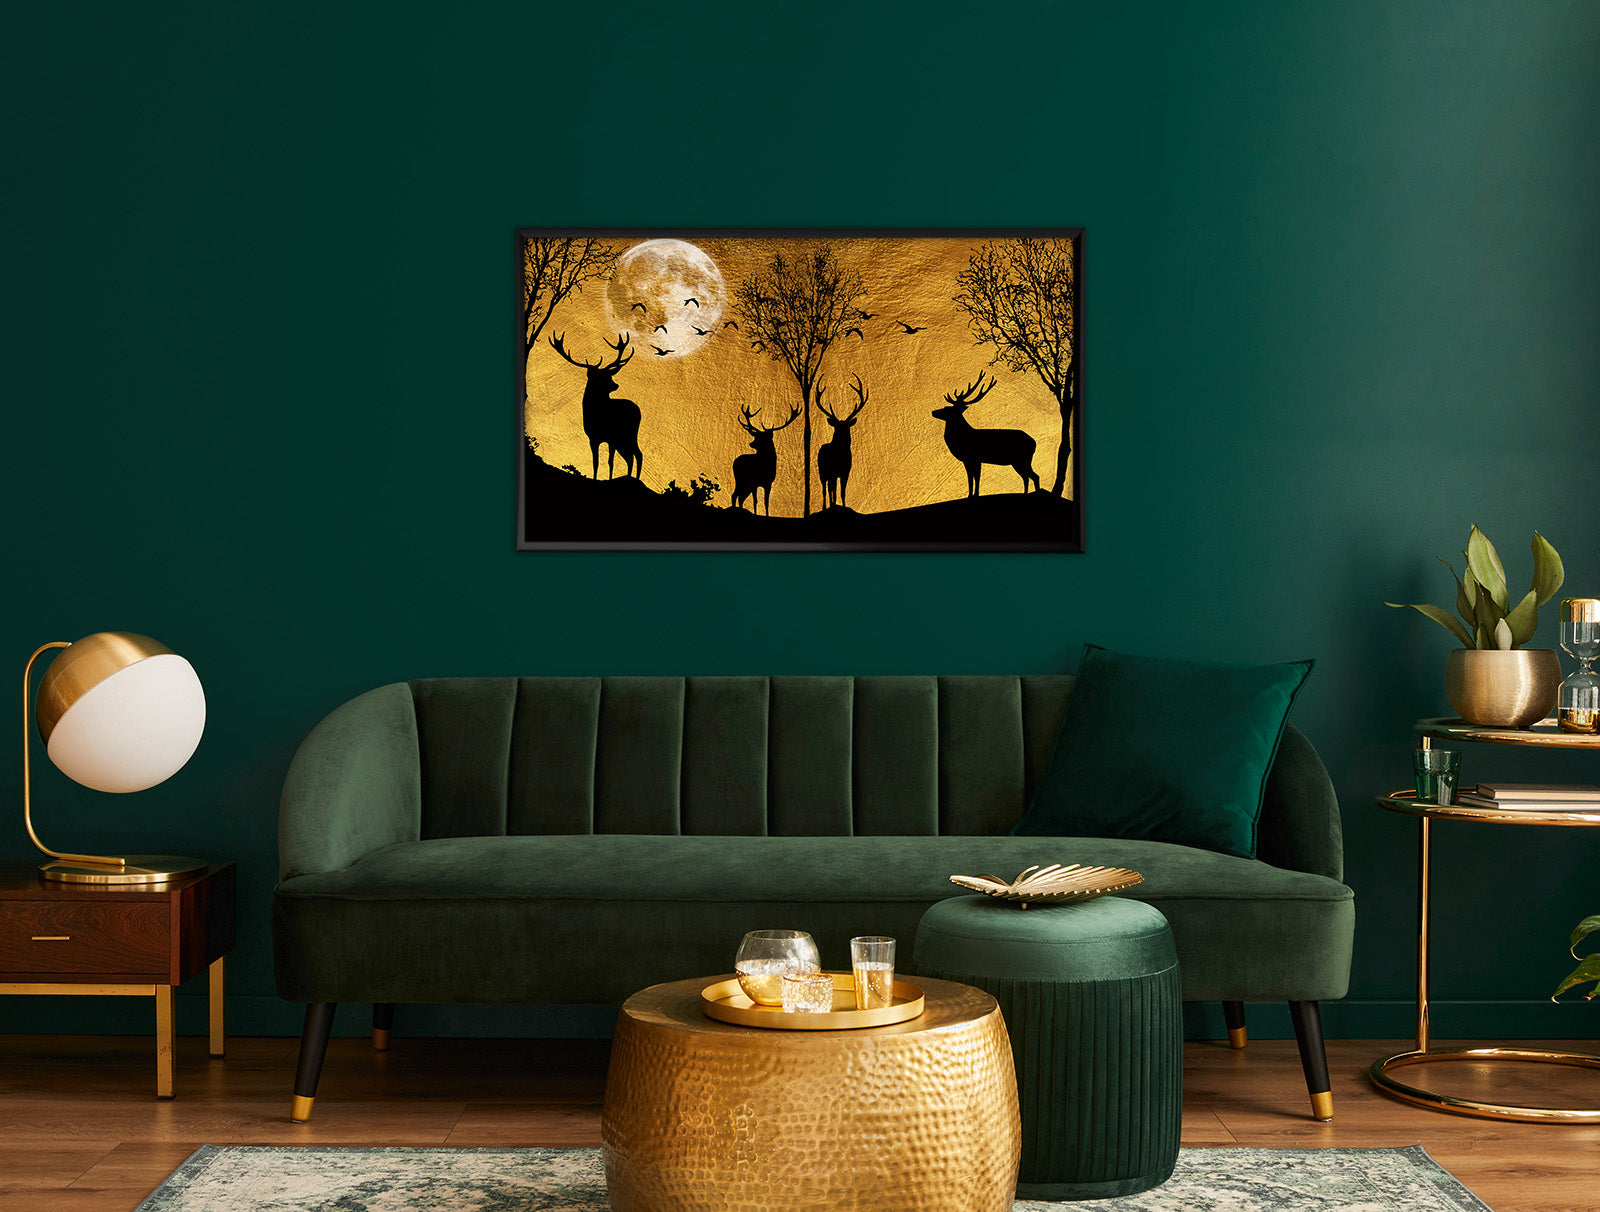 Black and Gold Wall Painting (Deer)